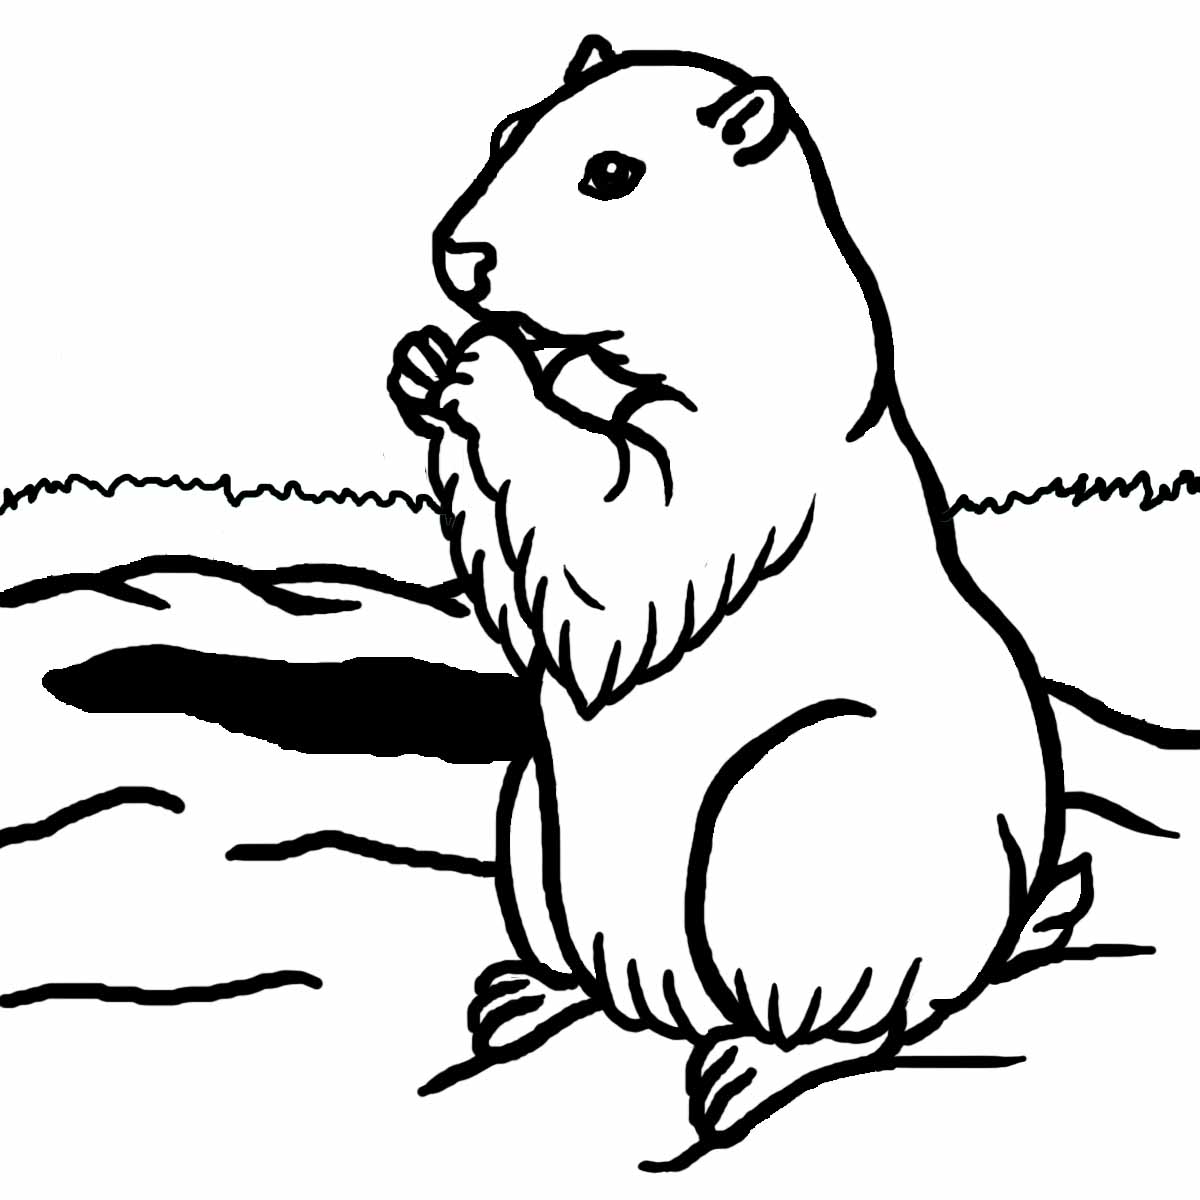 Groundhog Shadow Clipart Images  Pictures - Becuo